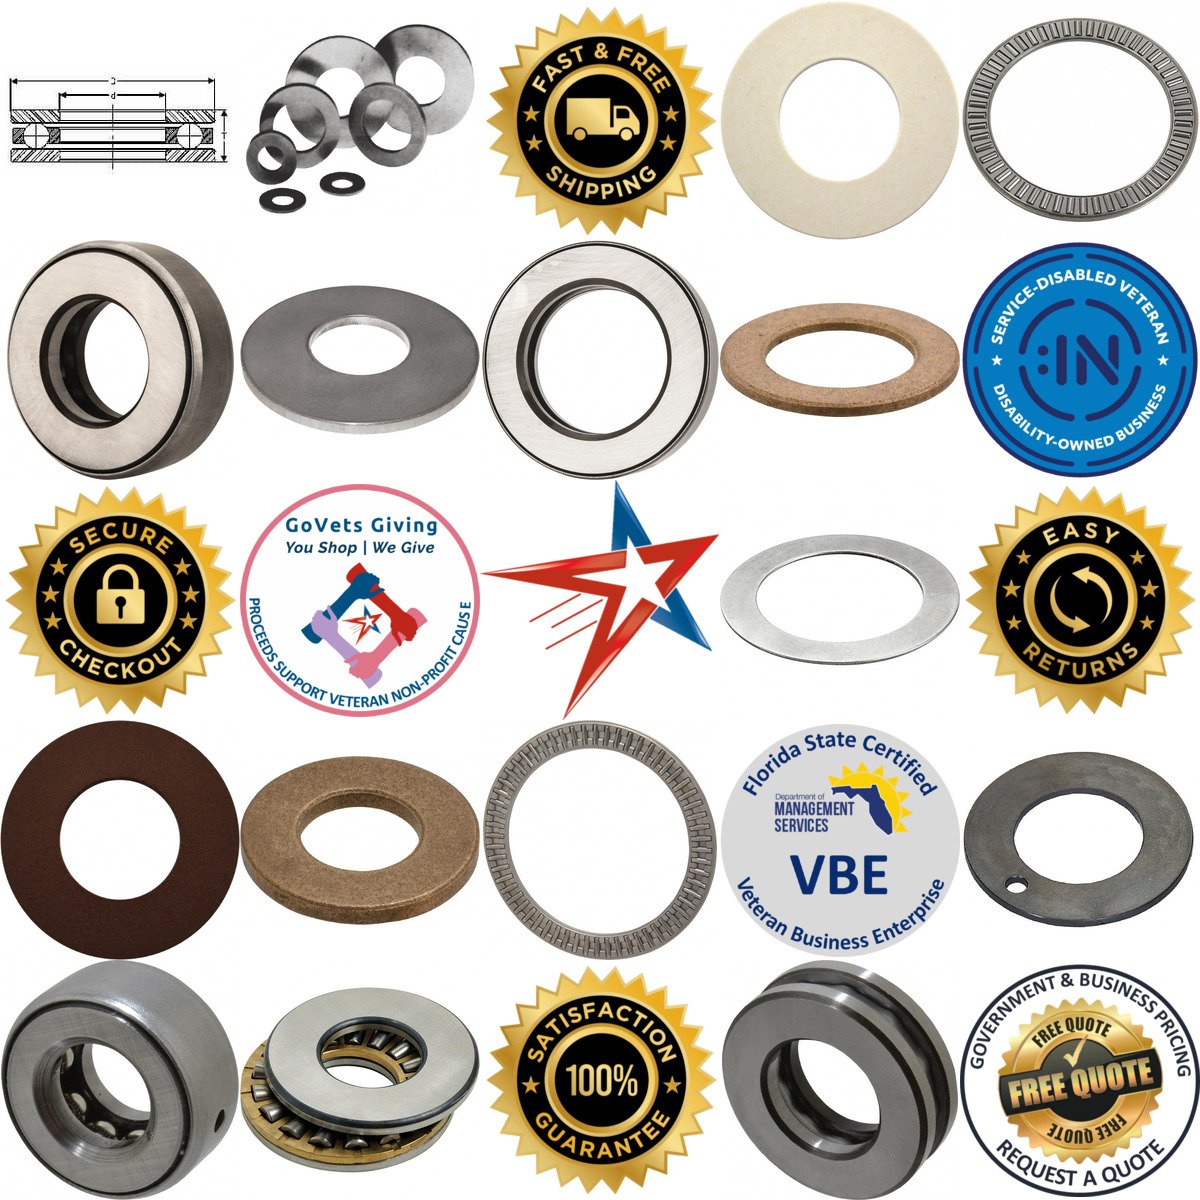 A selection of Thrust Bearings products on GoVets